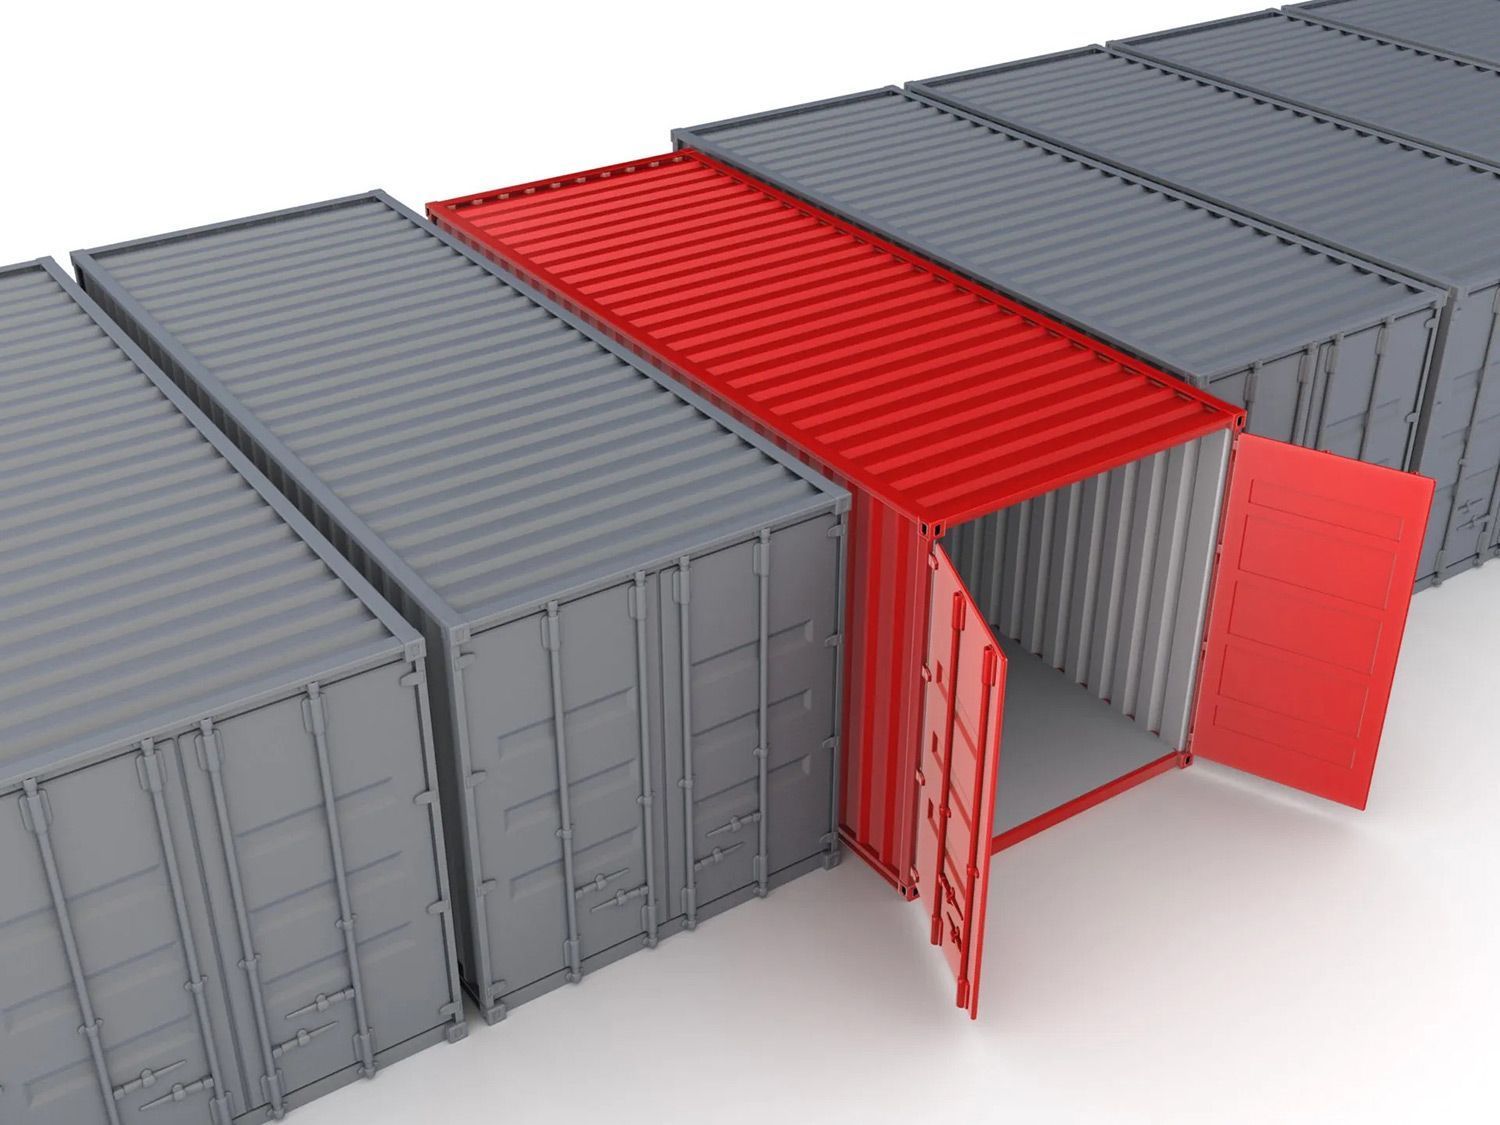 a row of shipping containers one of which has a red door open